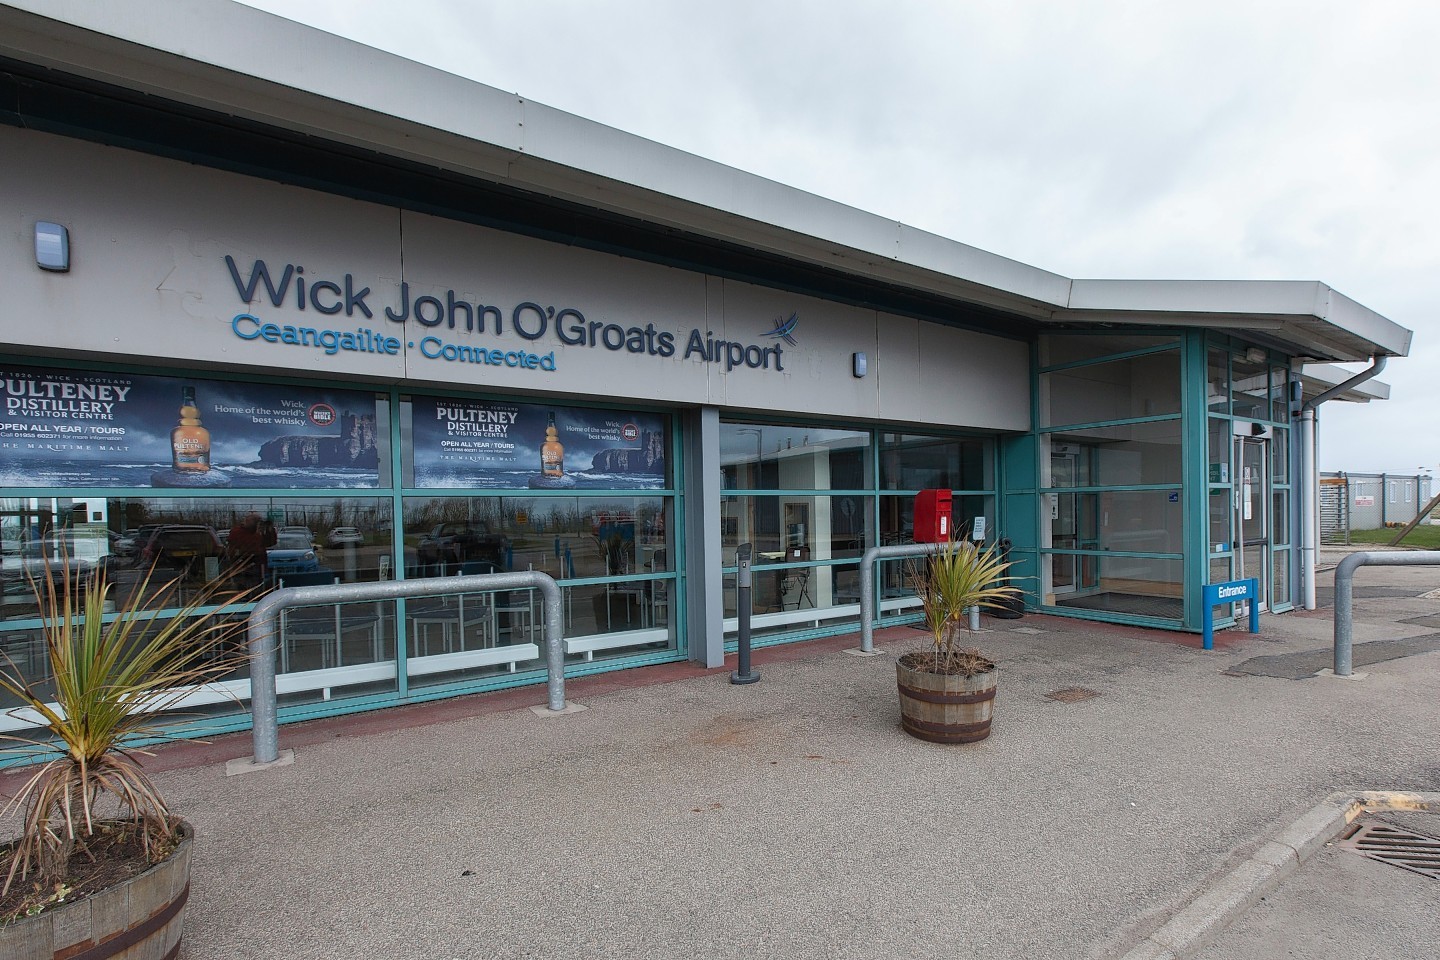 Finnie demands a rethink on air fare discount to Wick airport.